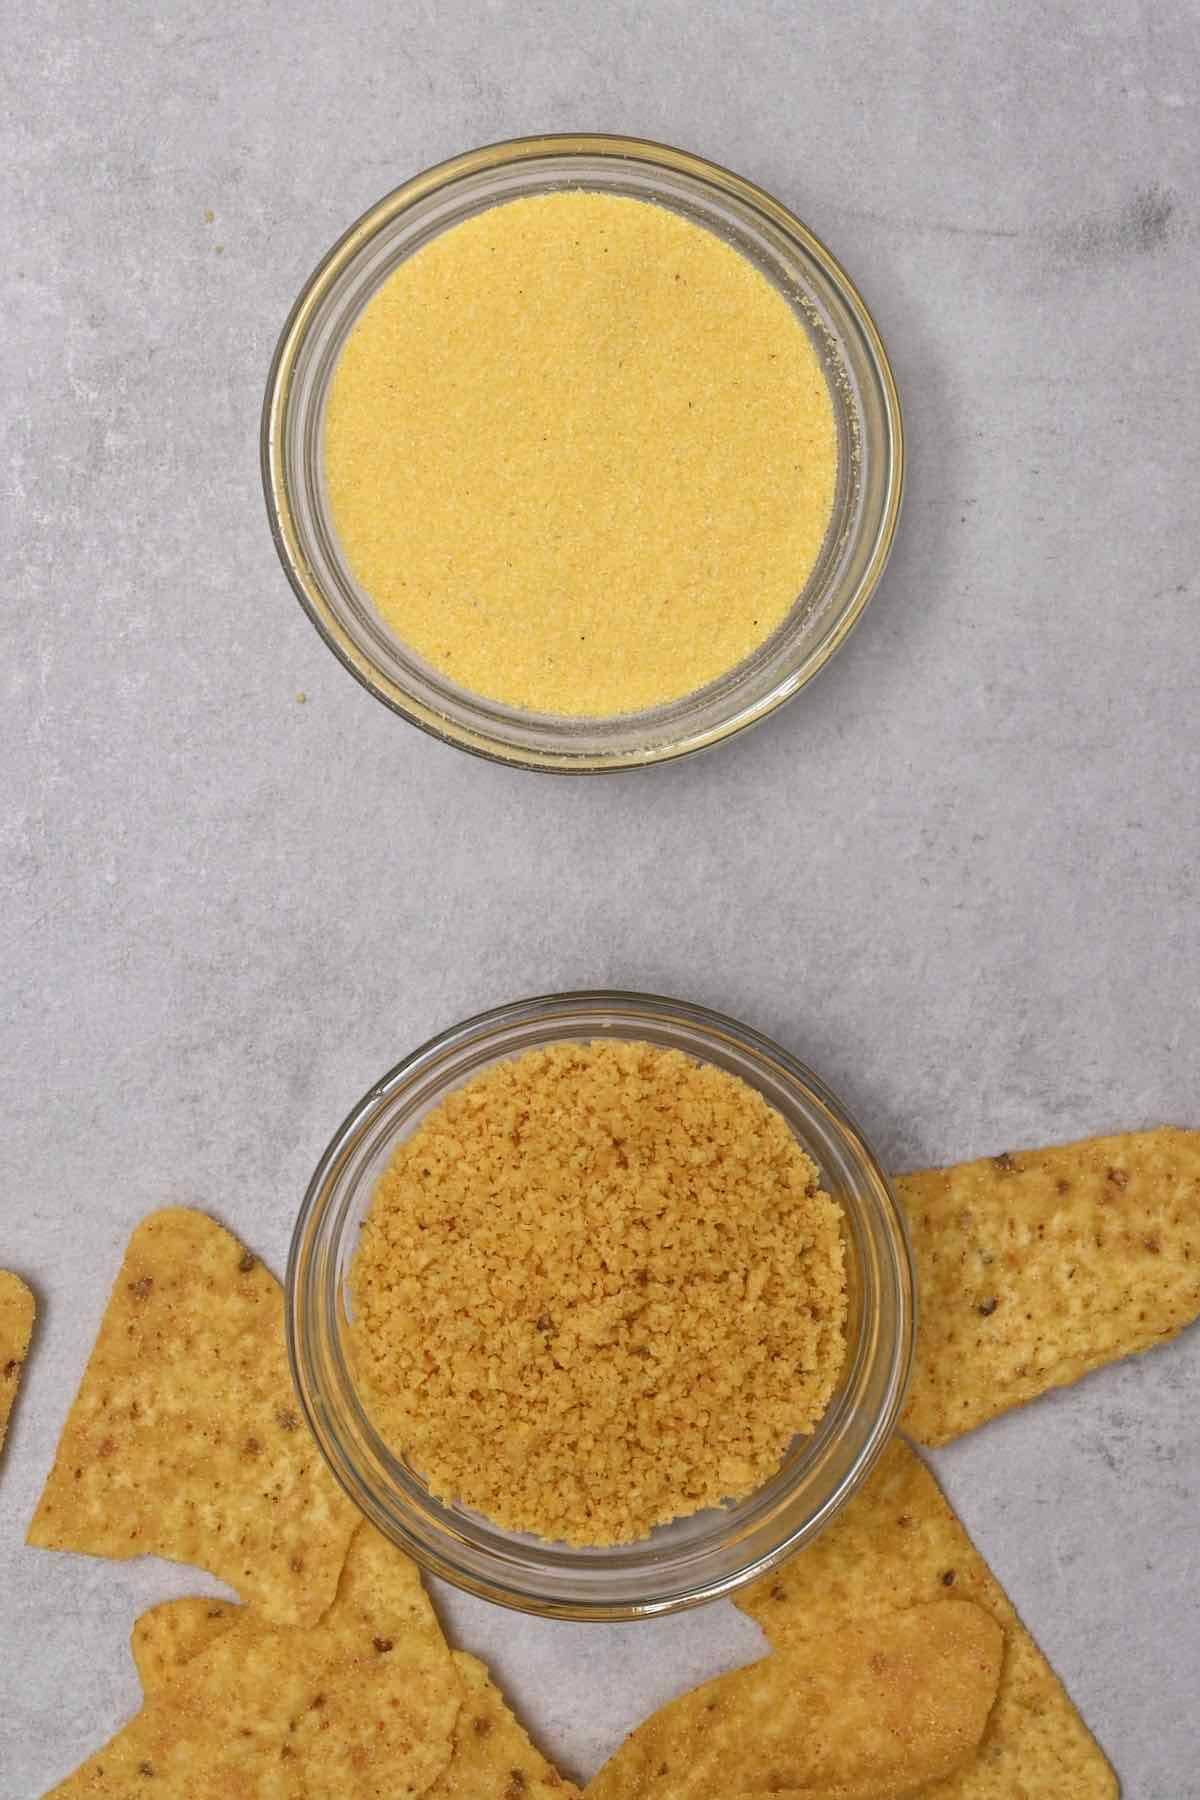 crushed tortilla chips next to cornmeal in glass bowl